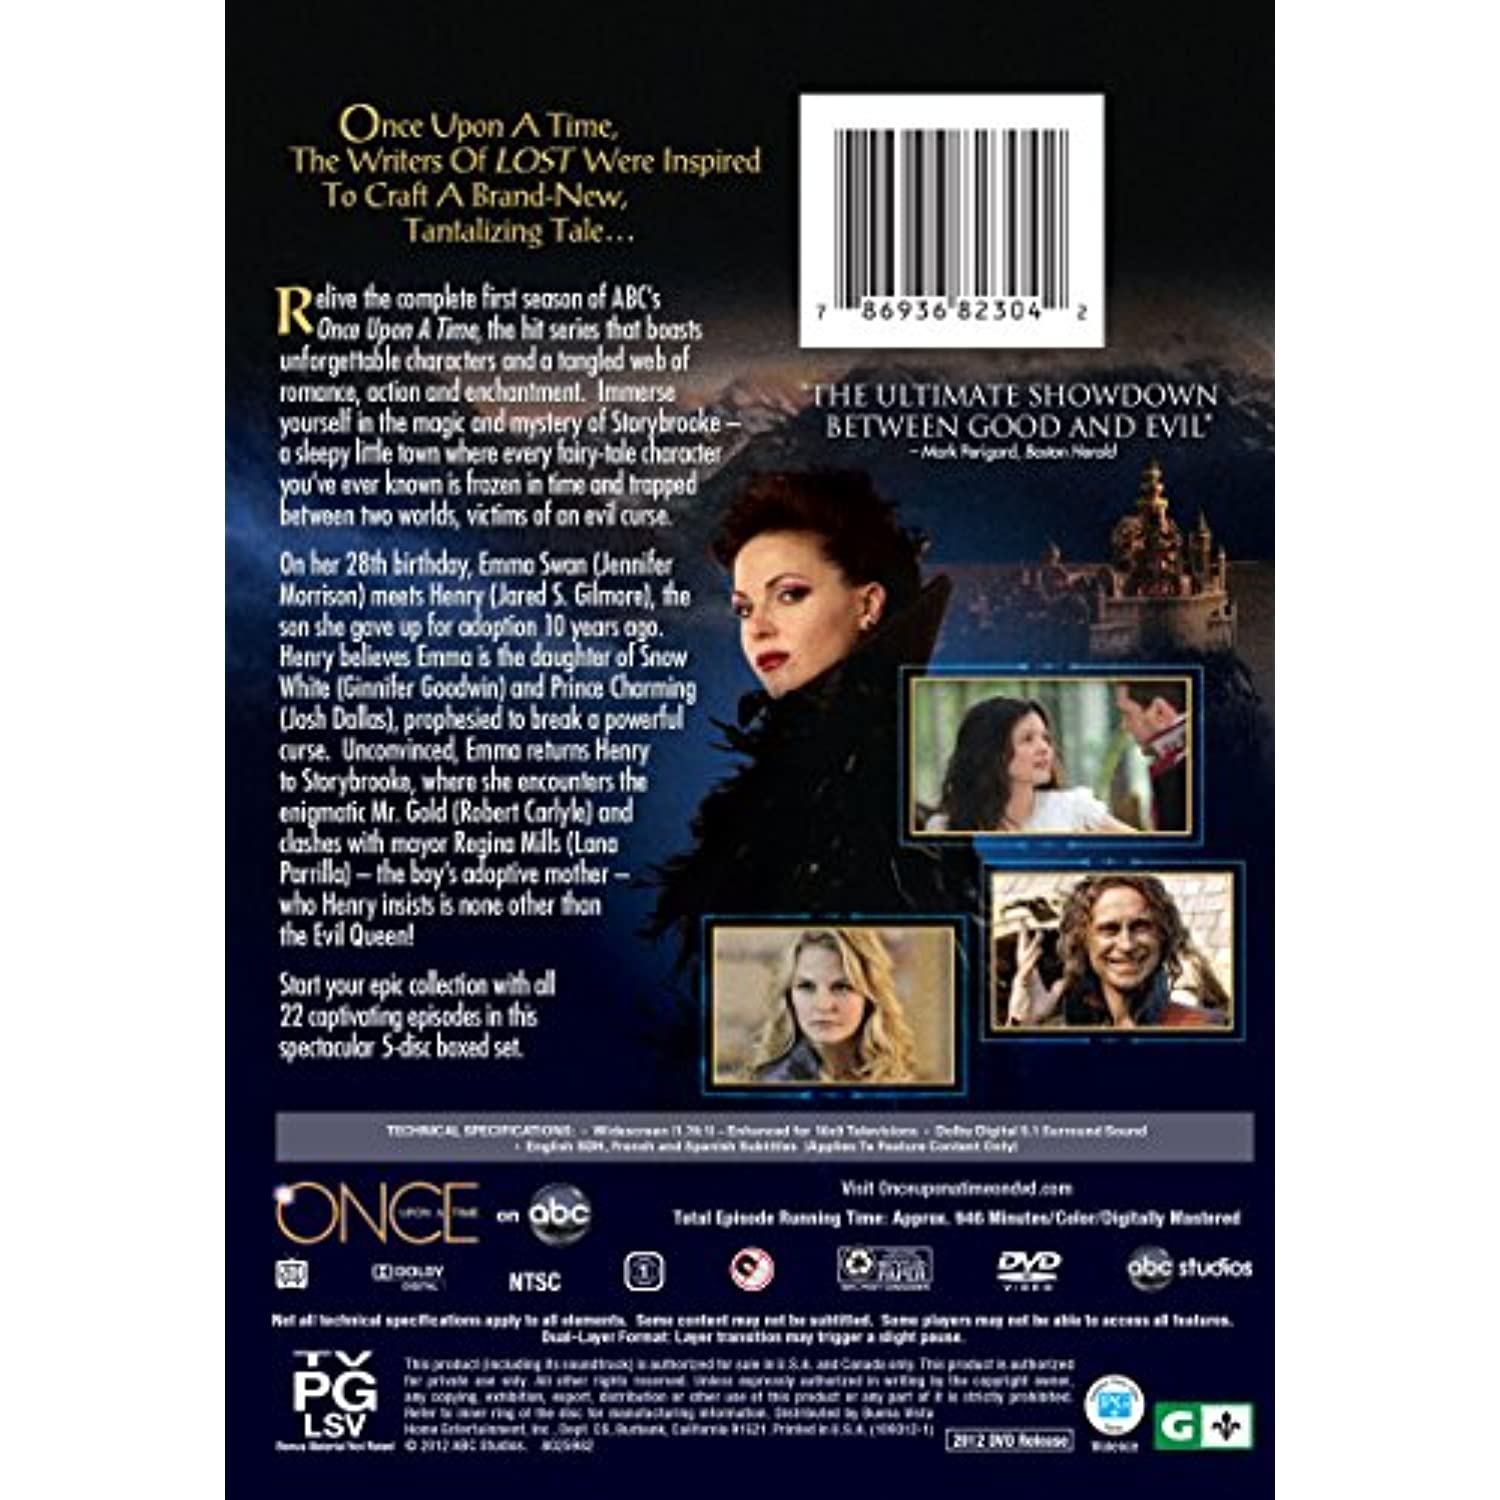 Once Upon a Time: The Complete First Season (DVD), ABC Studios, Drama - image 2 of 2